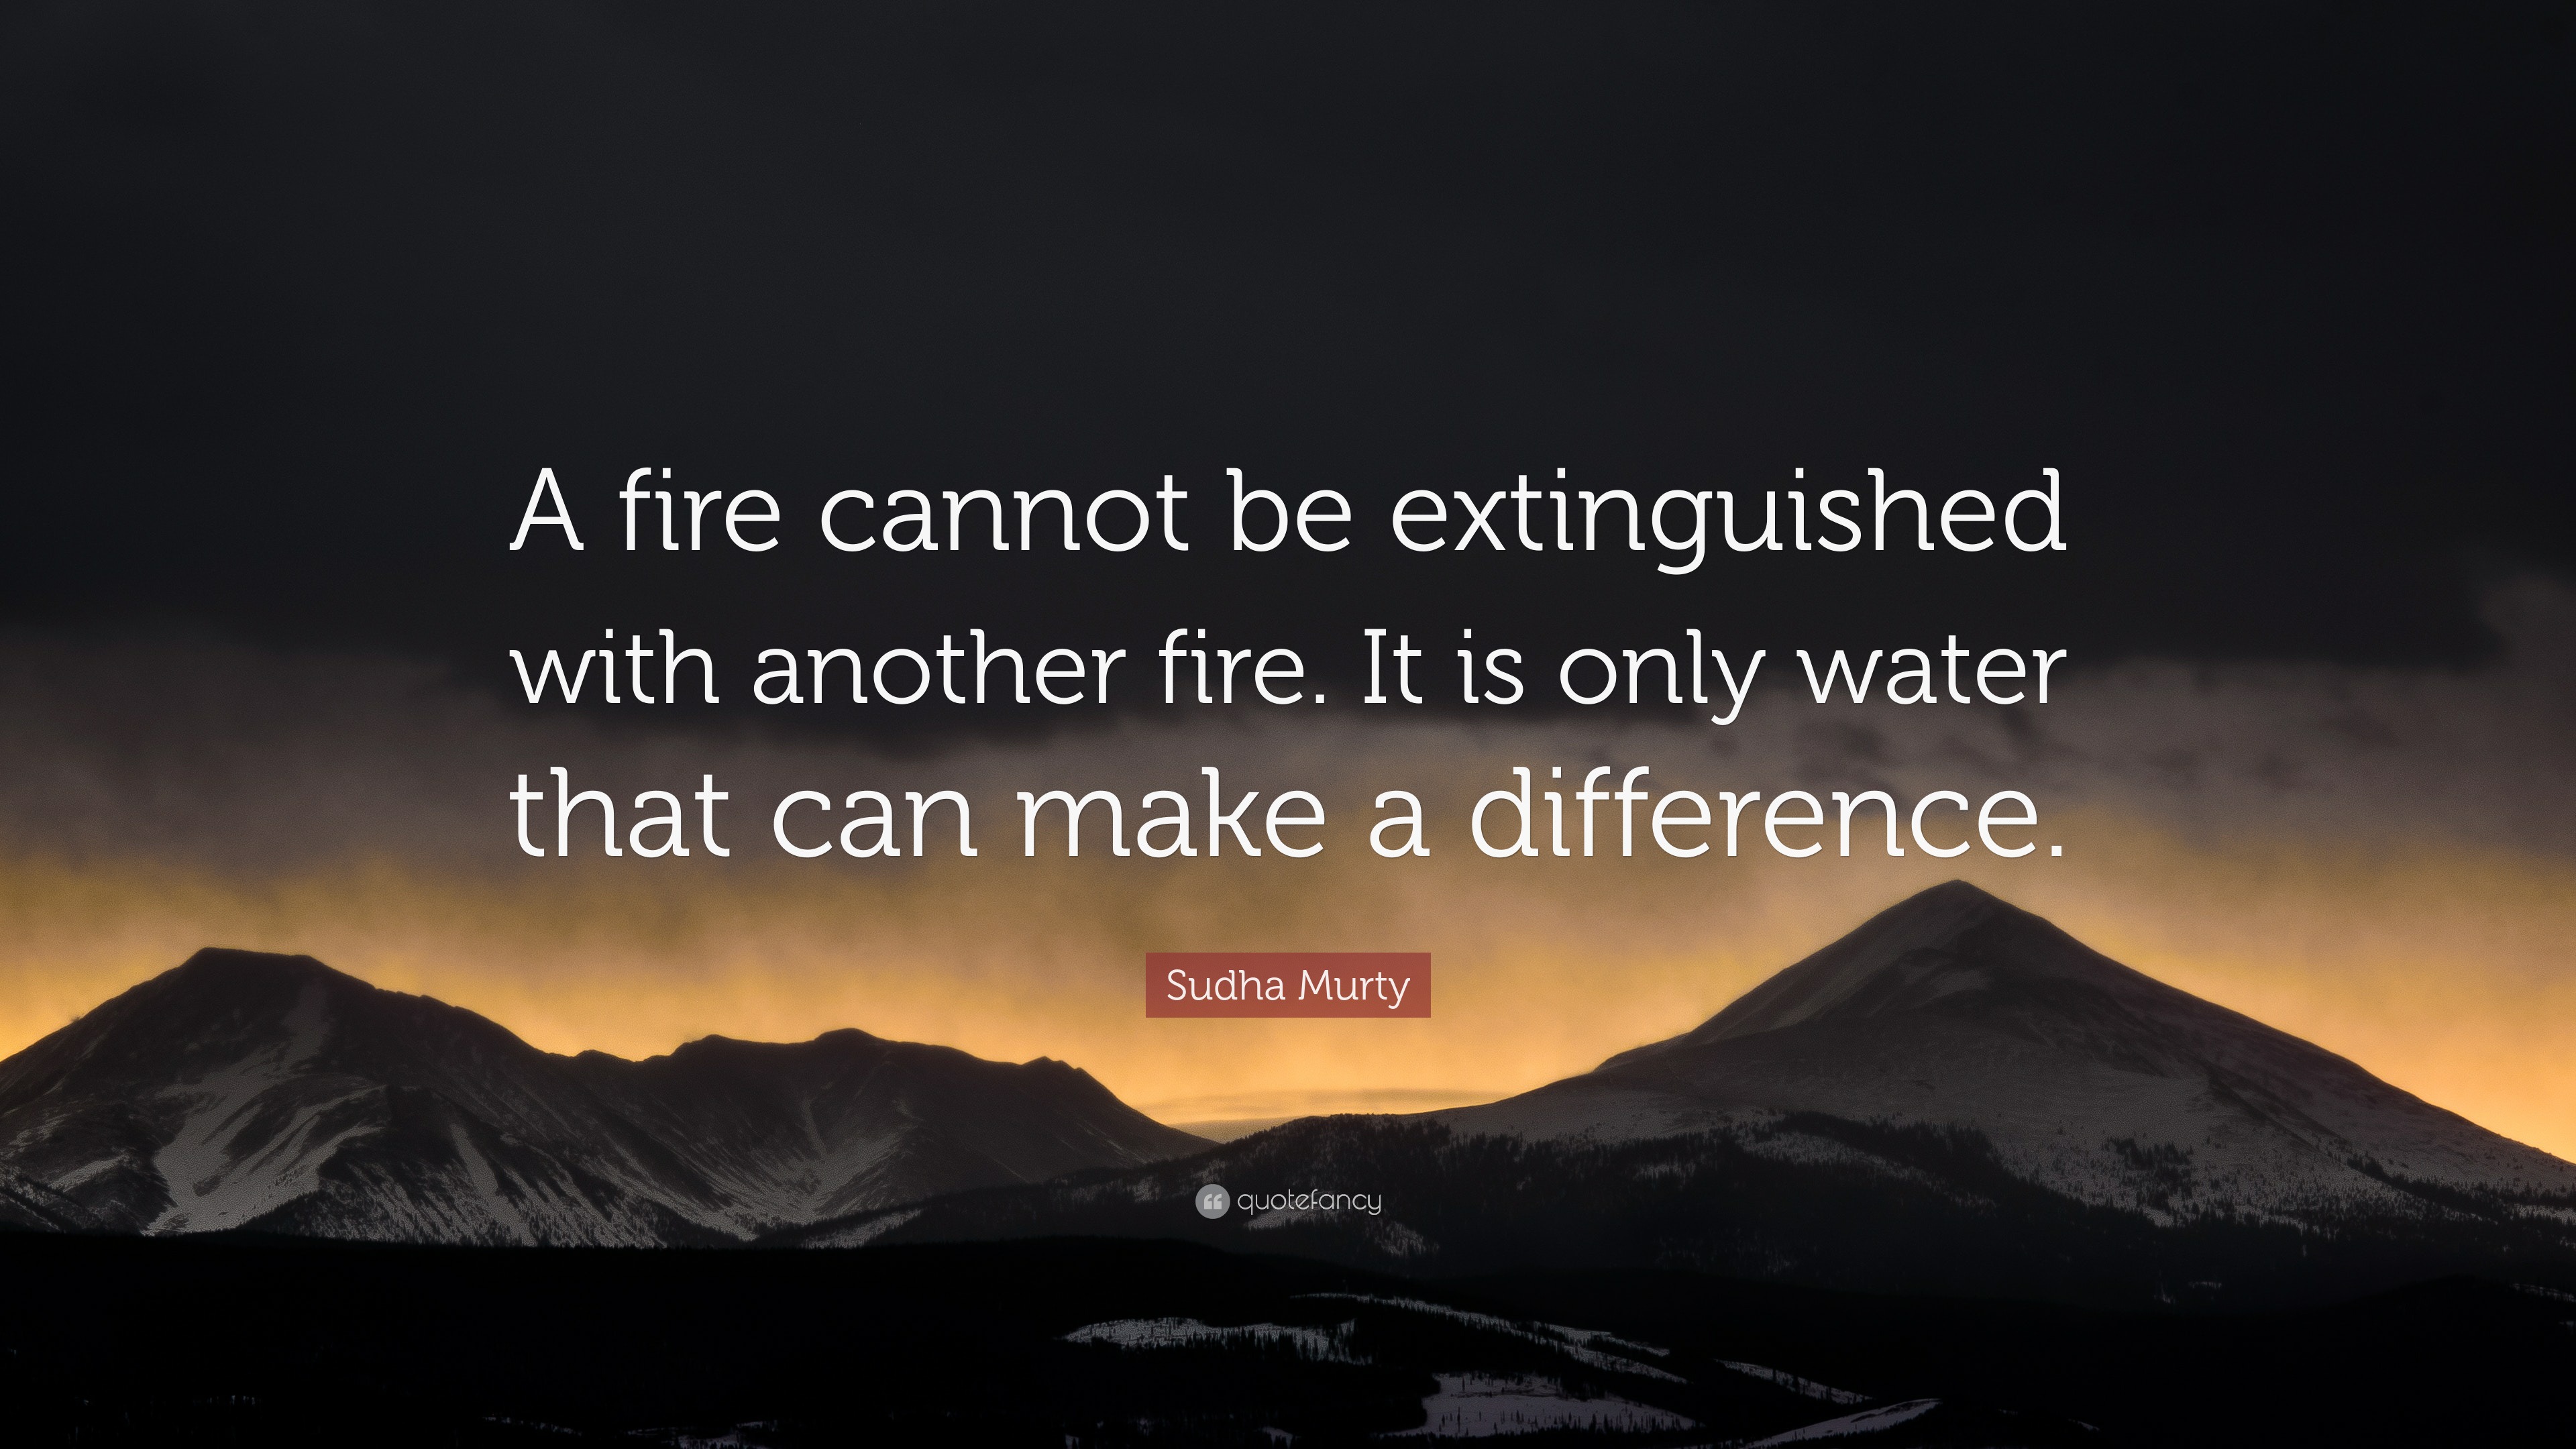 Sudha Murty Quote: “A fire cannot be extinguished with another fire. It ...